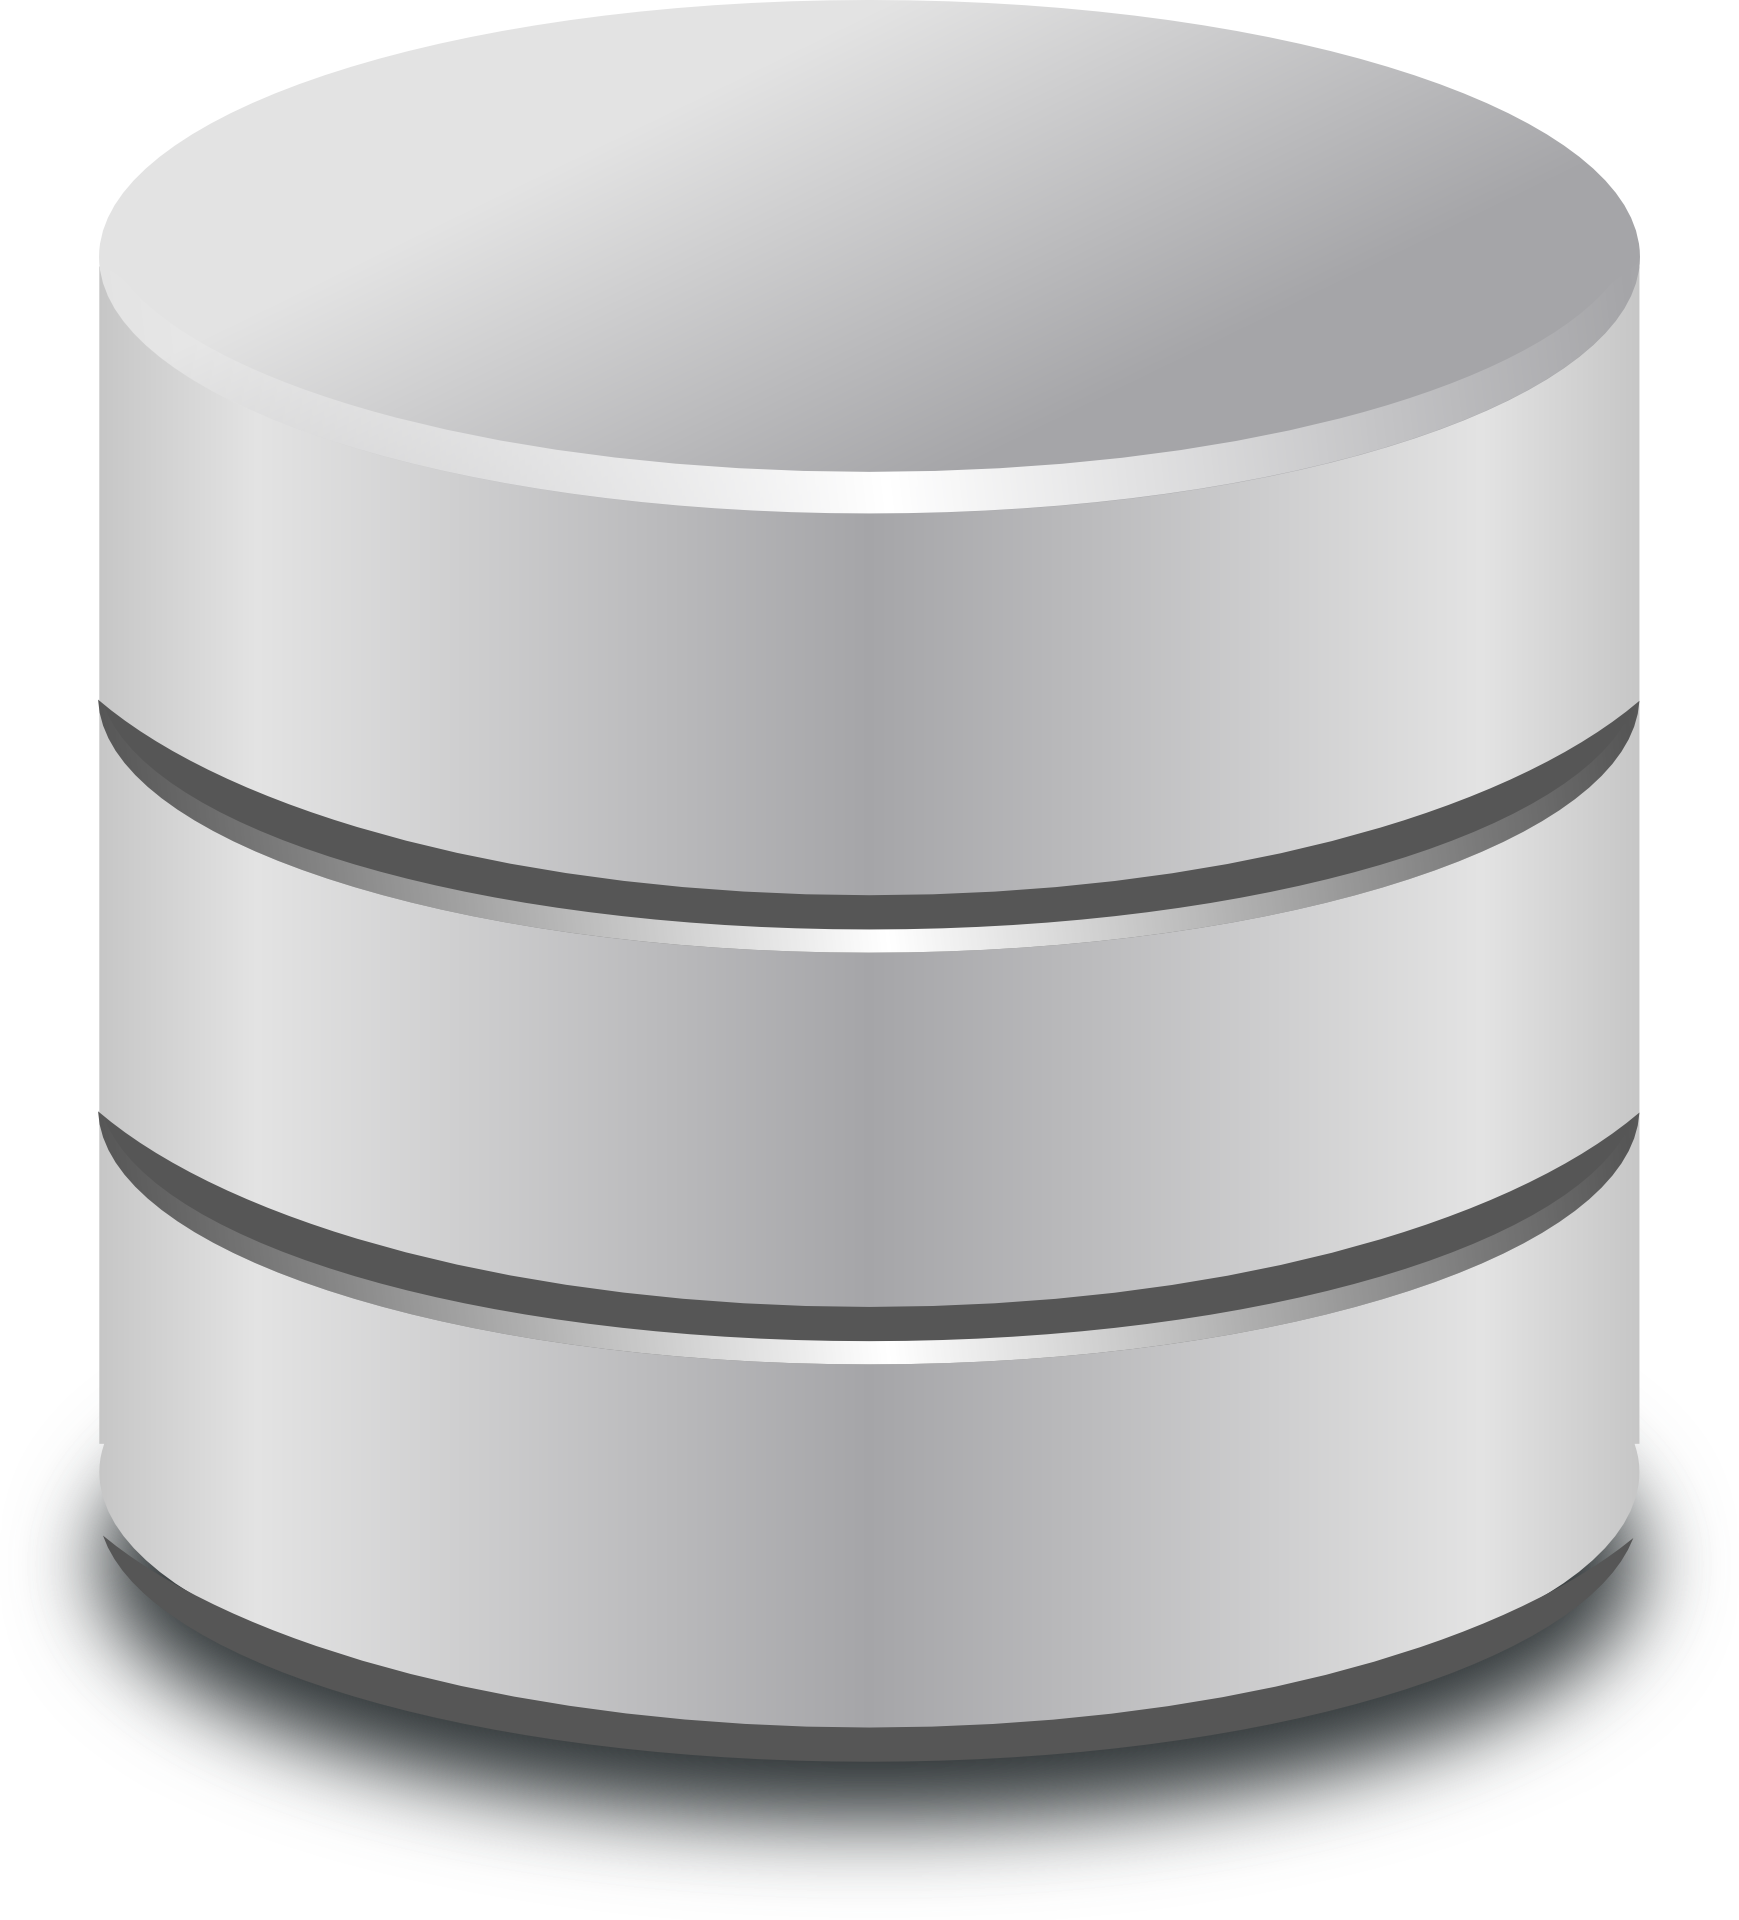 How to coordinate SQL database schema update with application